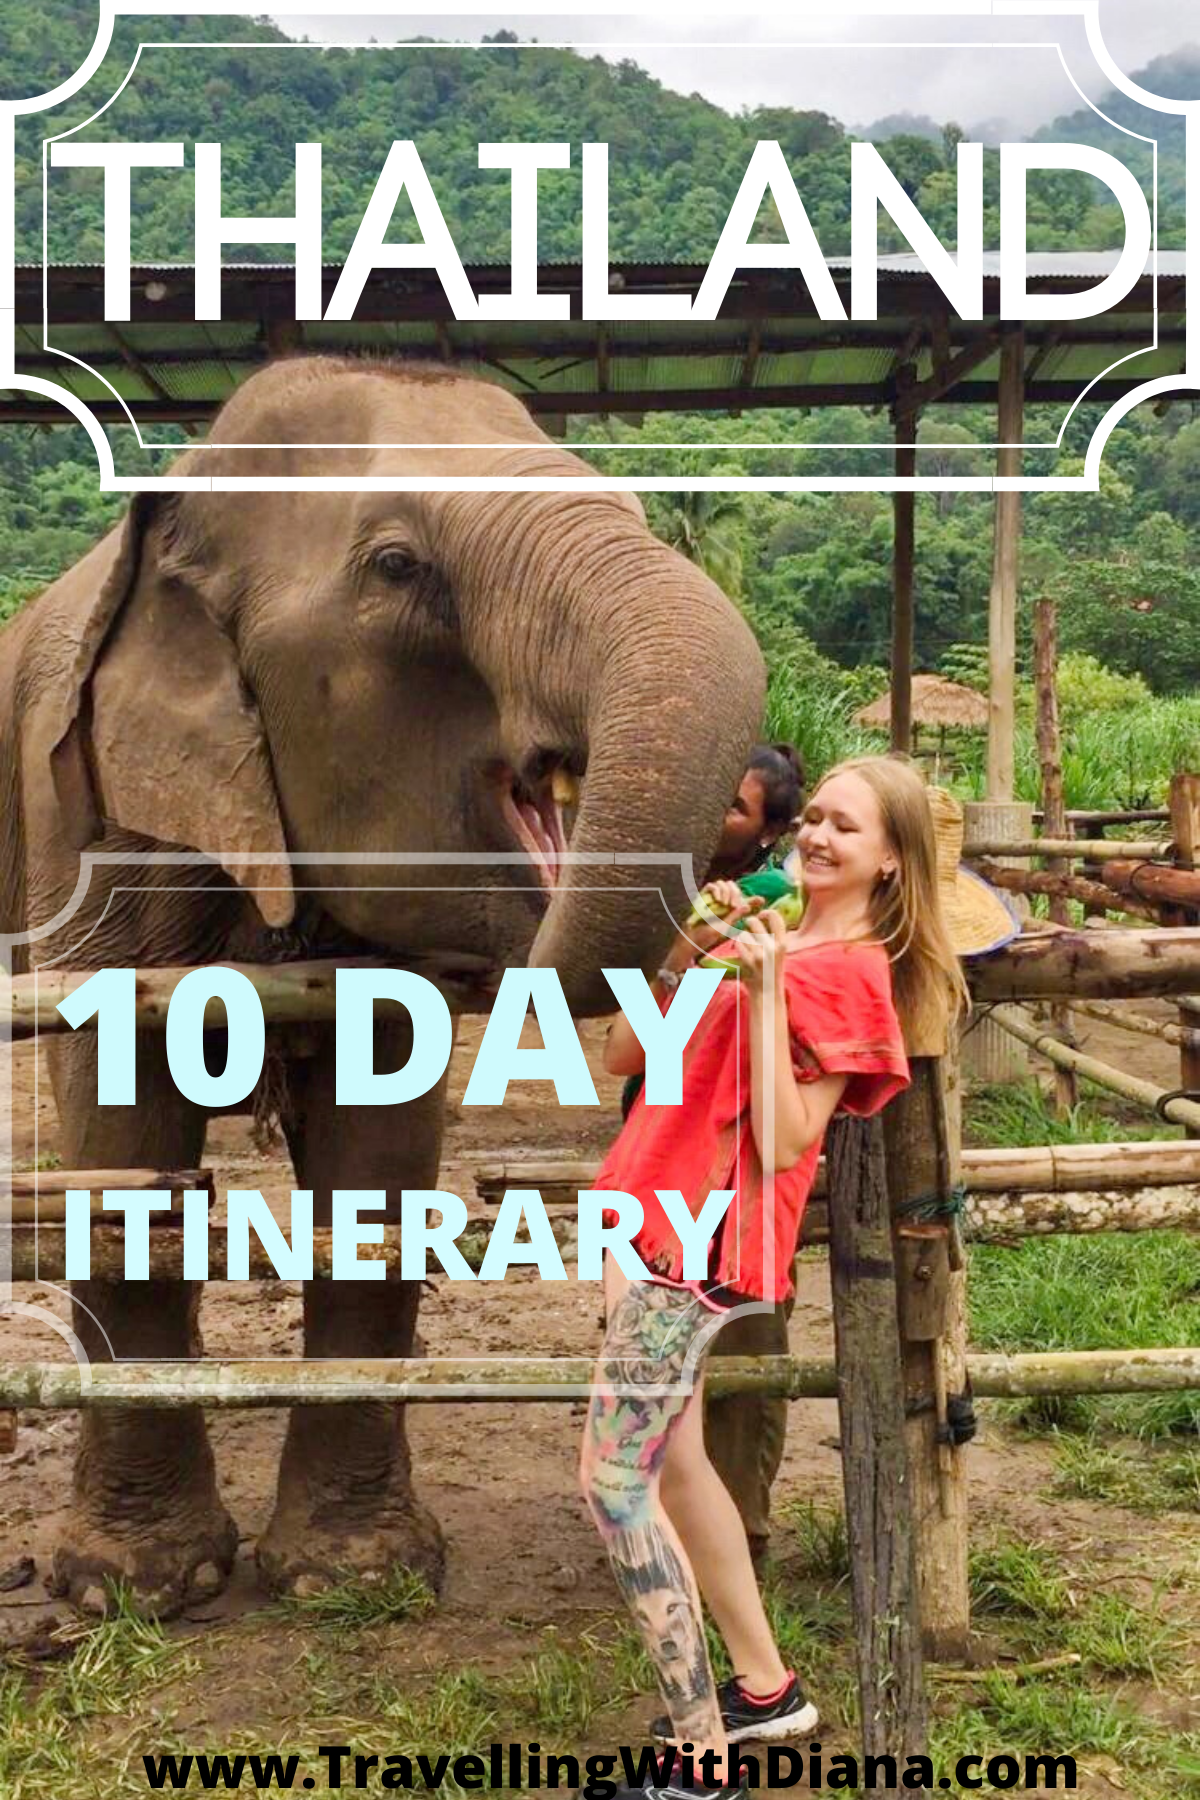 Thailand Itinerary 10 Days / What to Do during your 10 Day trip to THAILAND -   19 travel destinations Thailand country ideas